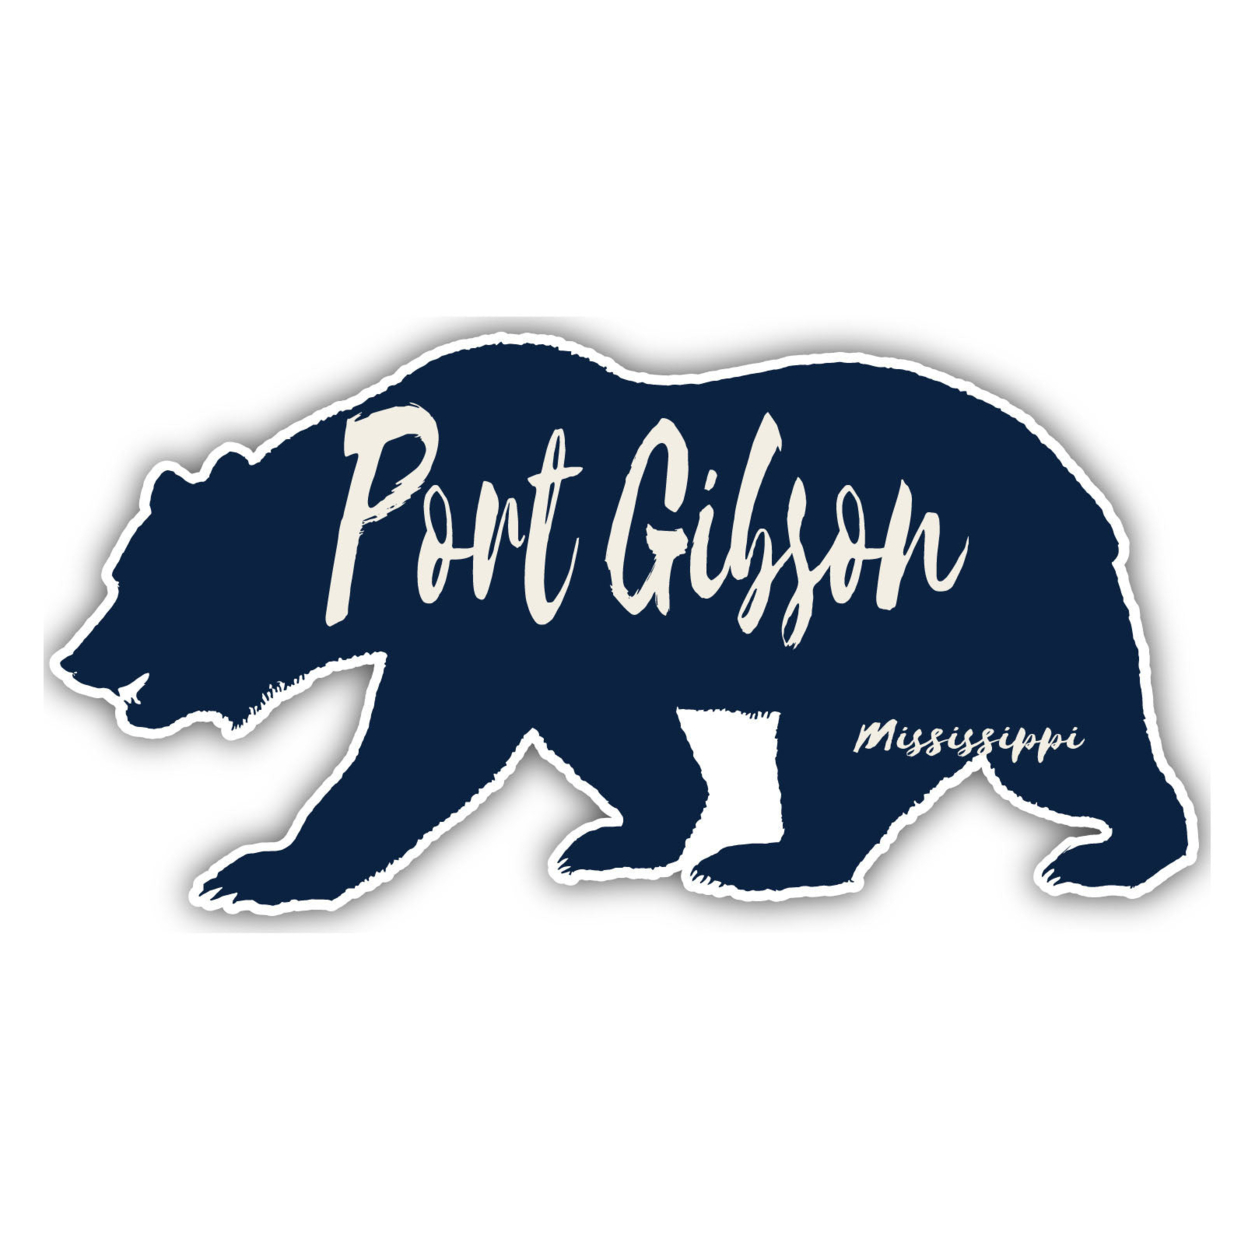 Port Gibson Mississippi Souvenir Decorative Stickers (Choose Theme And Size) - Single Unit, 2-Inch, Bear